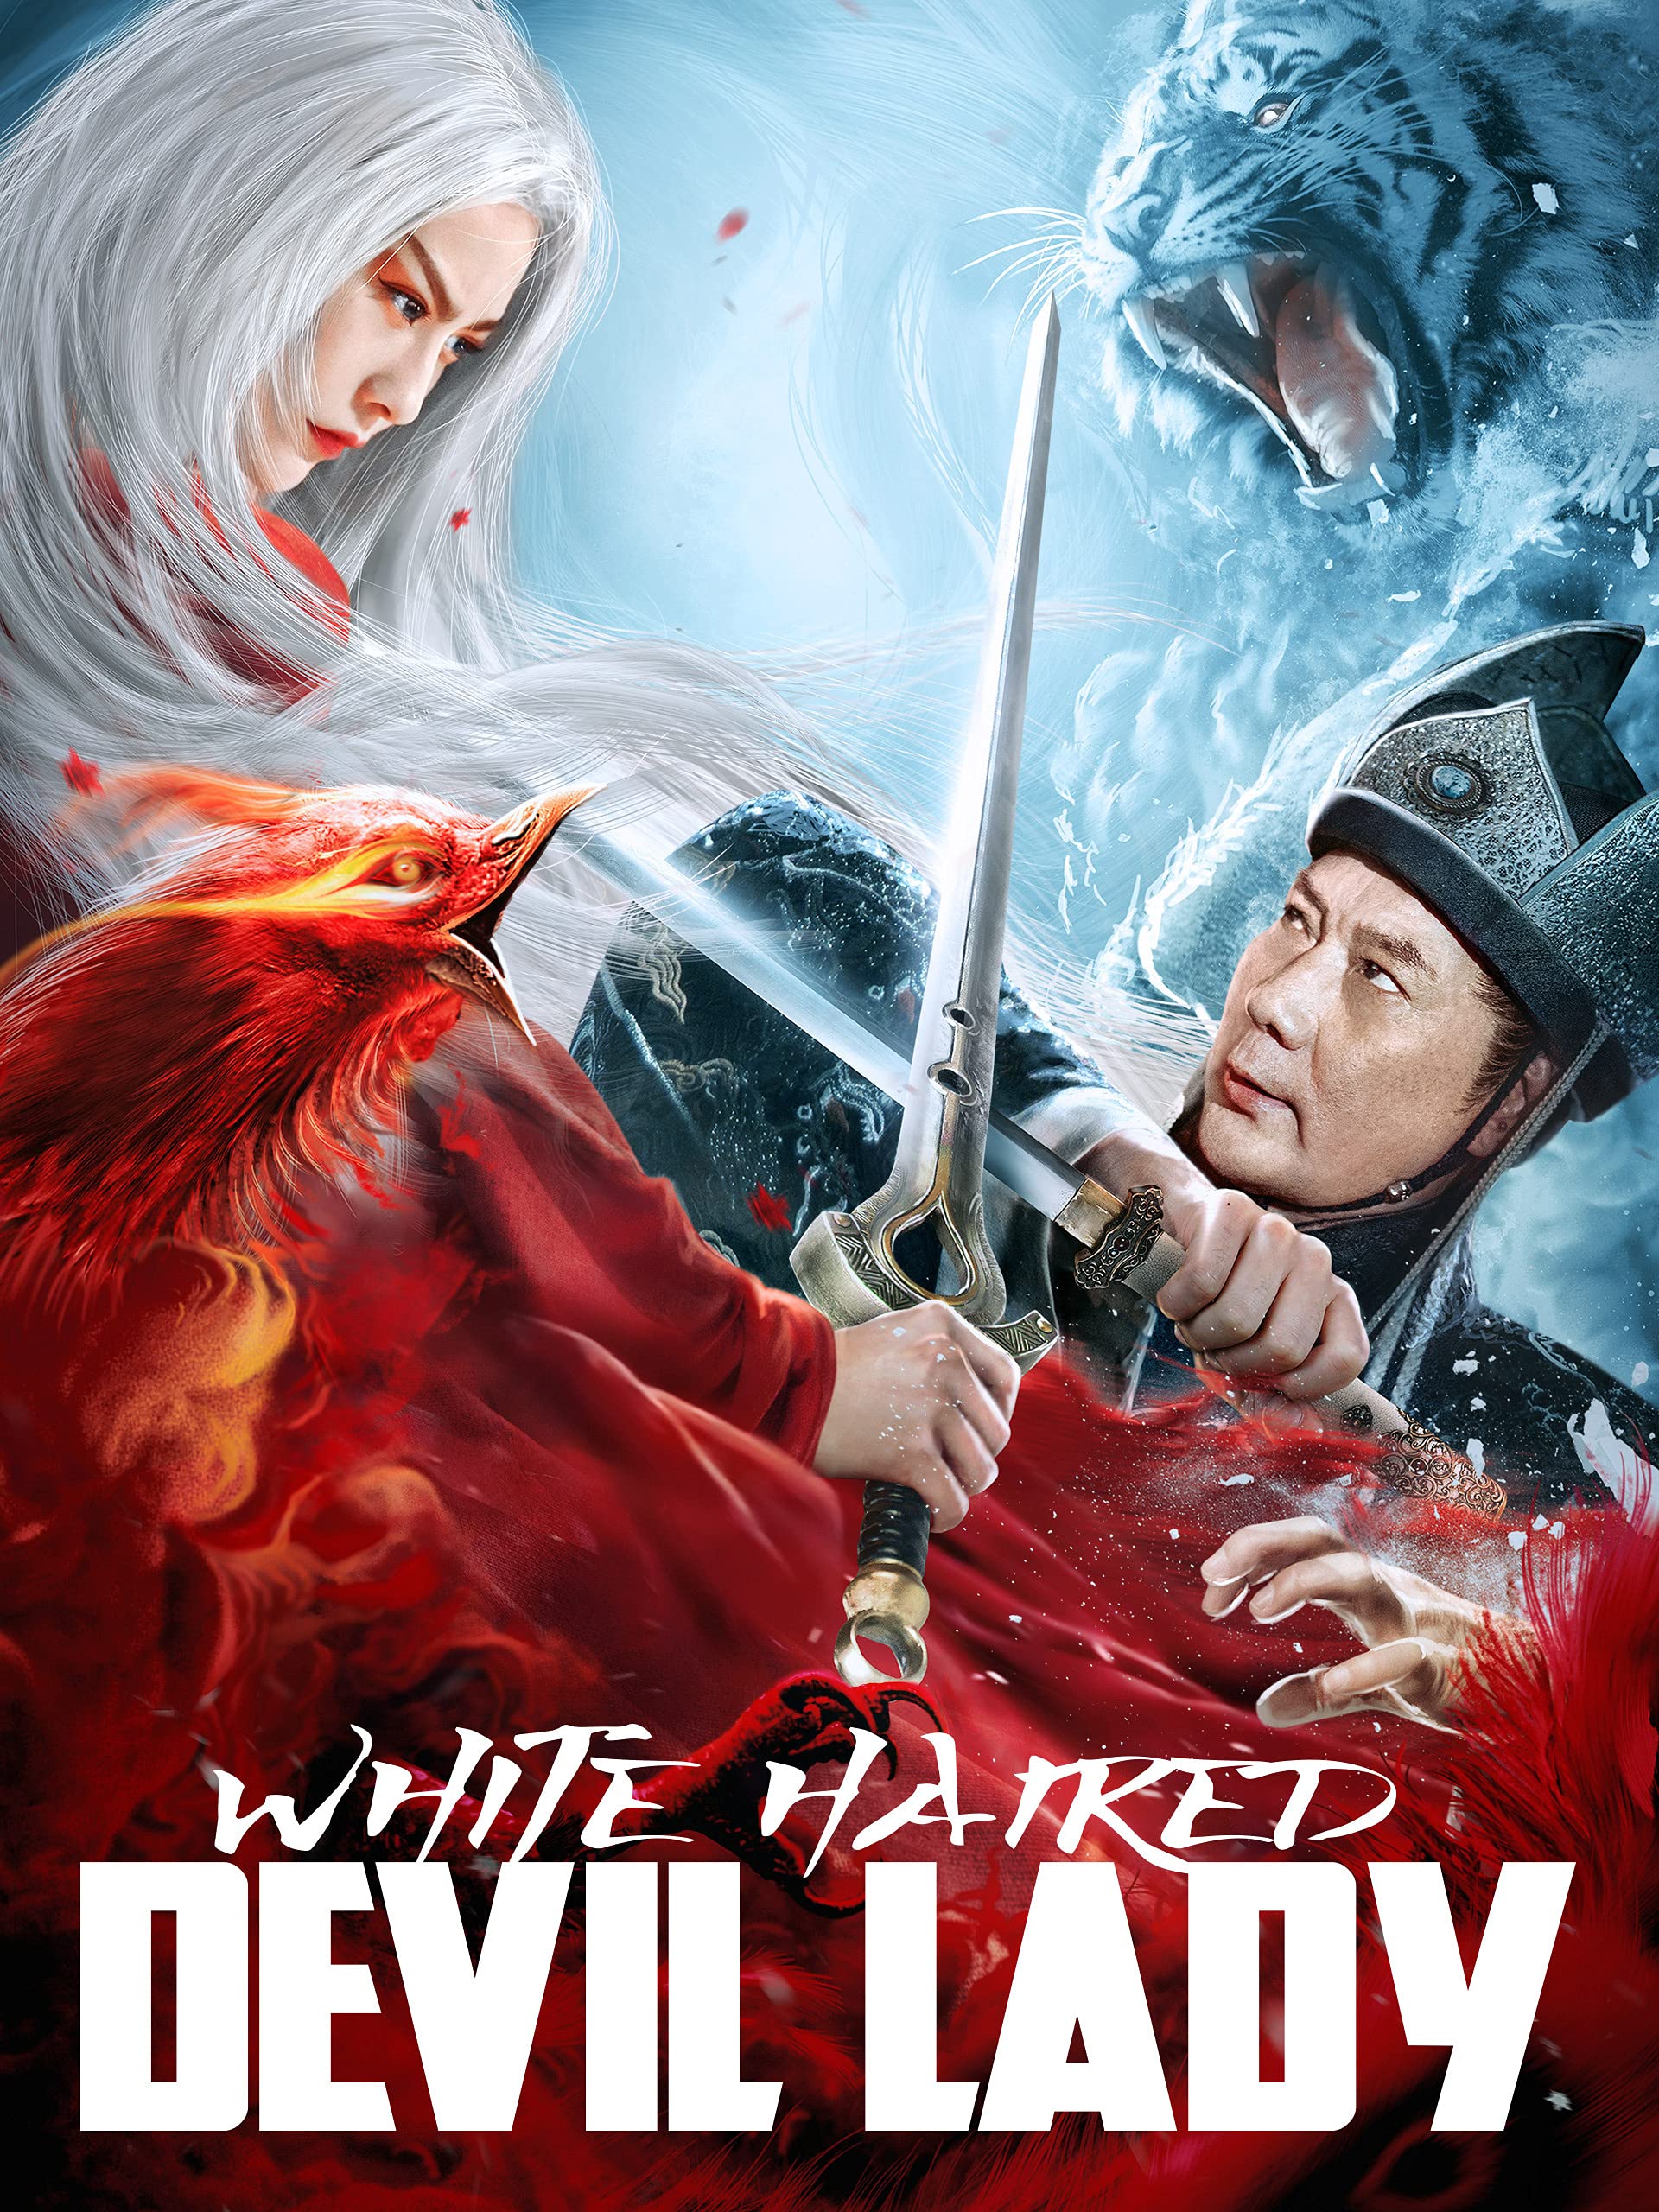 White Haired Devil Lady (2020) Hindi Dubbed ORG 480p HDRip x264 230MB Download